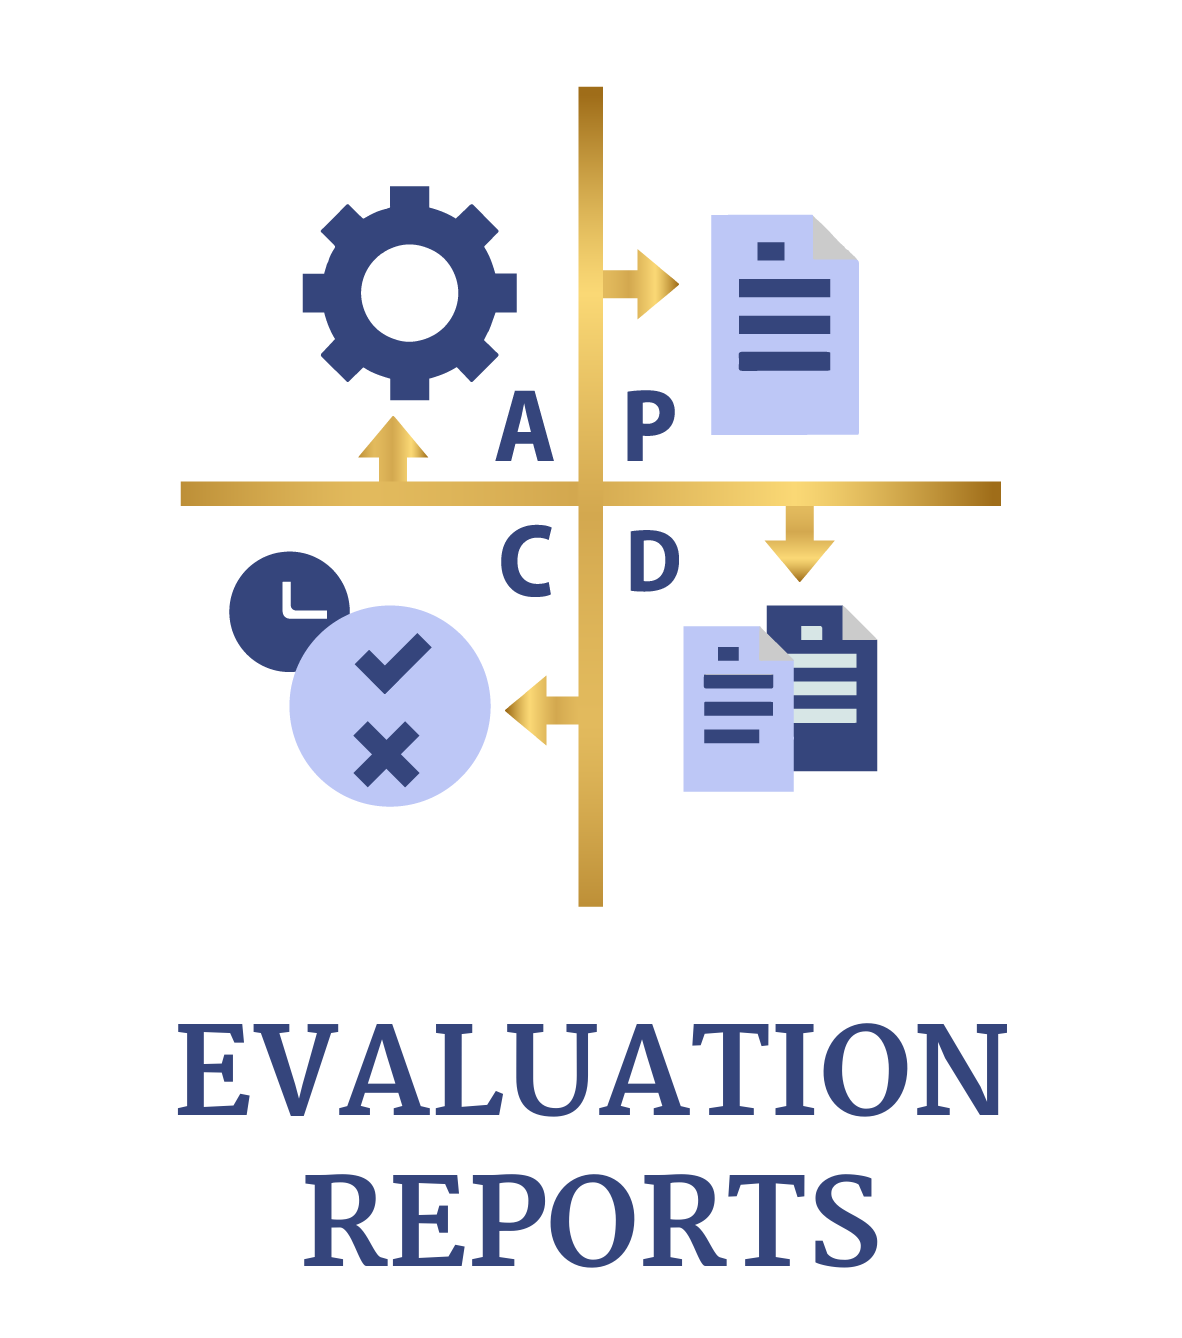 Evaluation reports